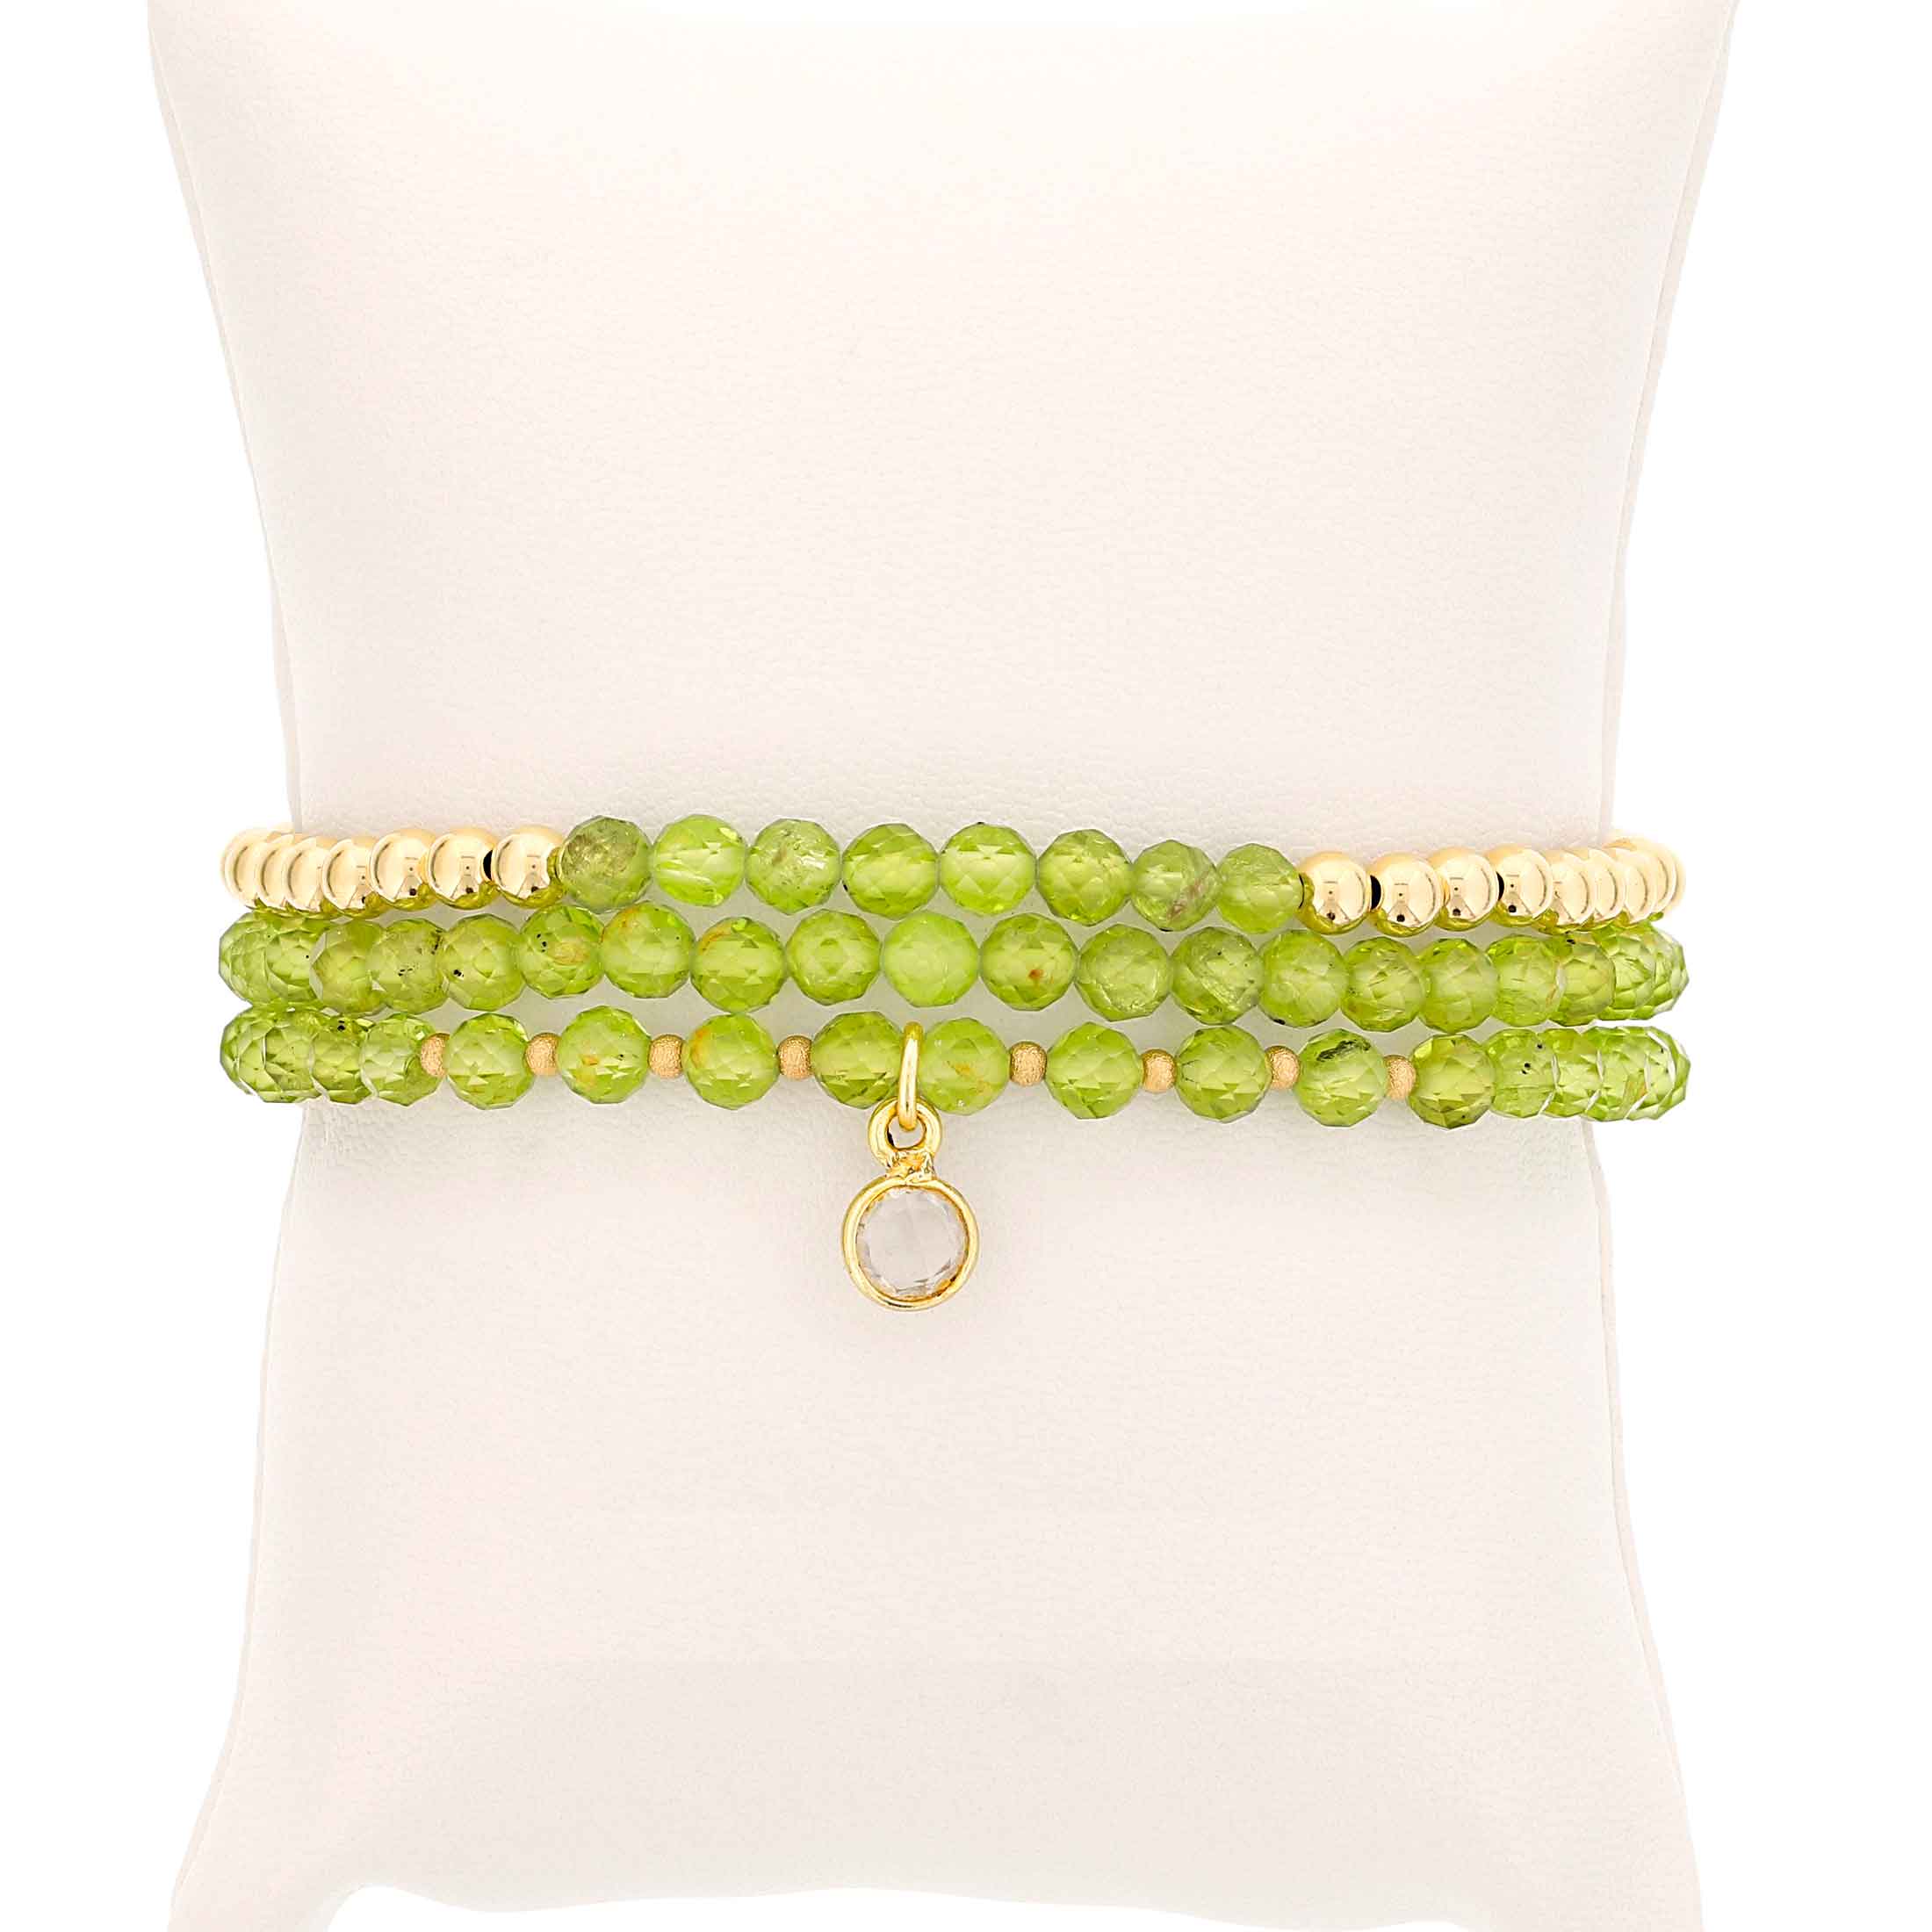 Peridot and Gold Filled Beads, 4mm, Stretch Bracelets, Set of 3